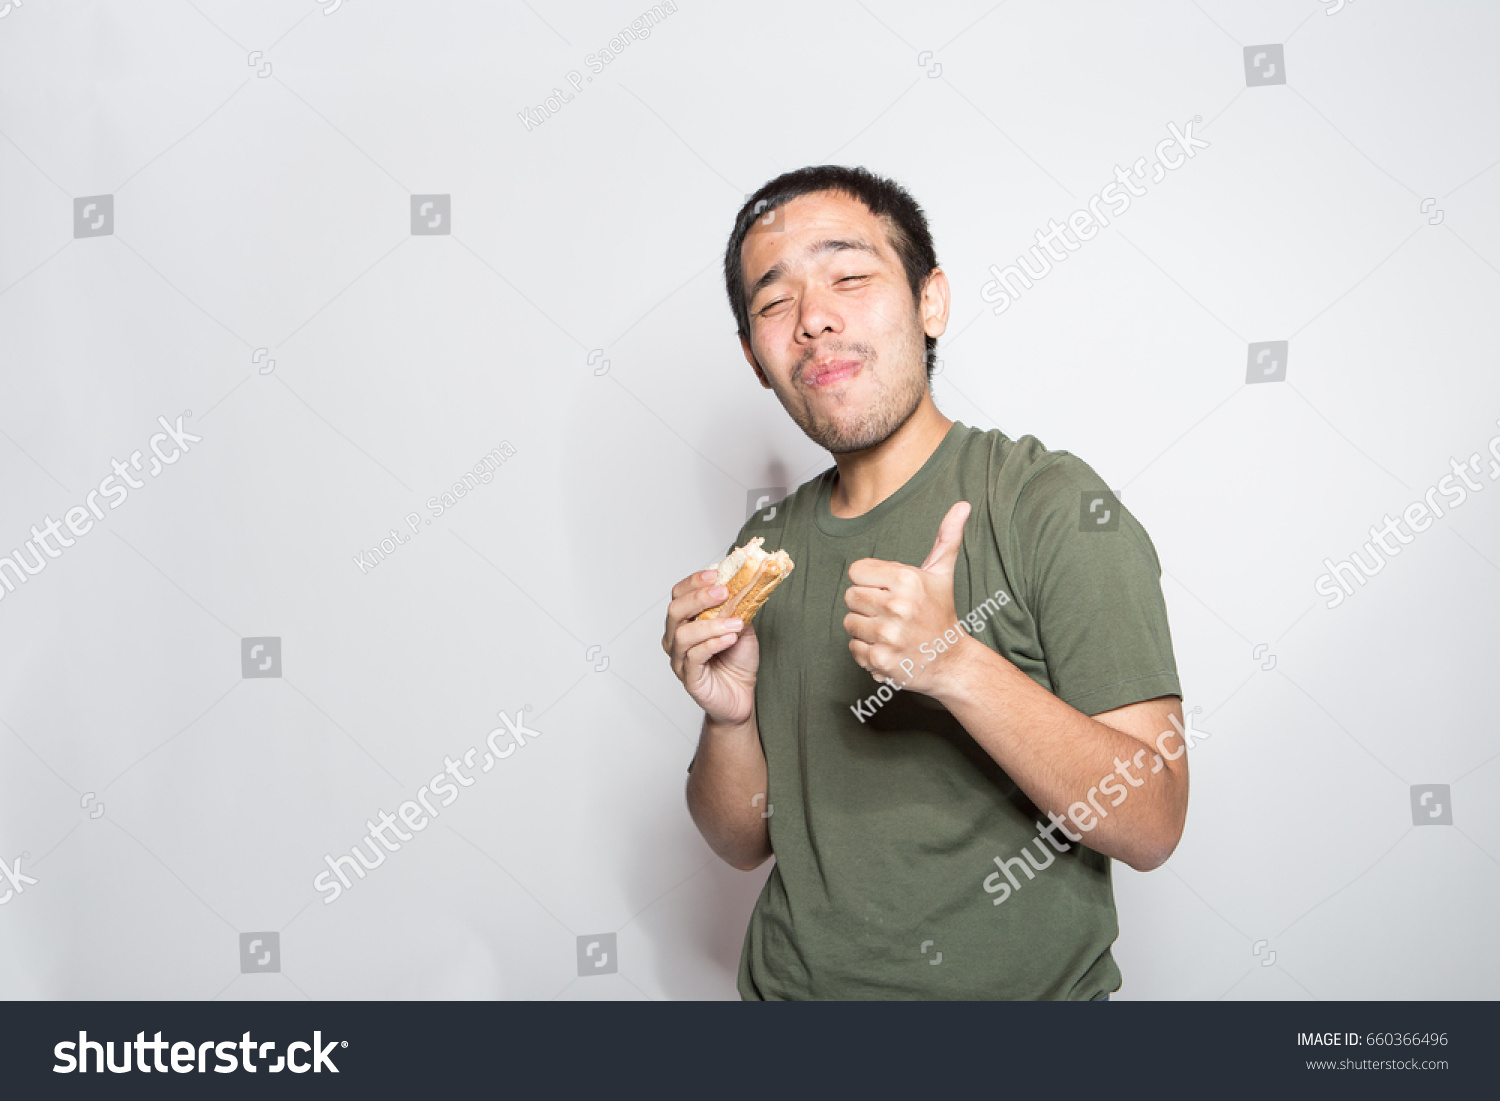 unhealthy eating concept, man enjoy and happy to eat his junk food with delicious face expression #660366496